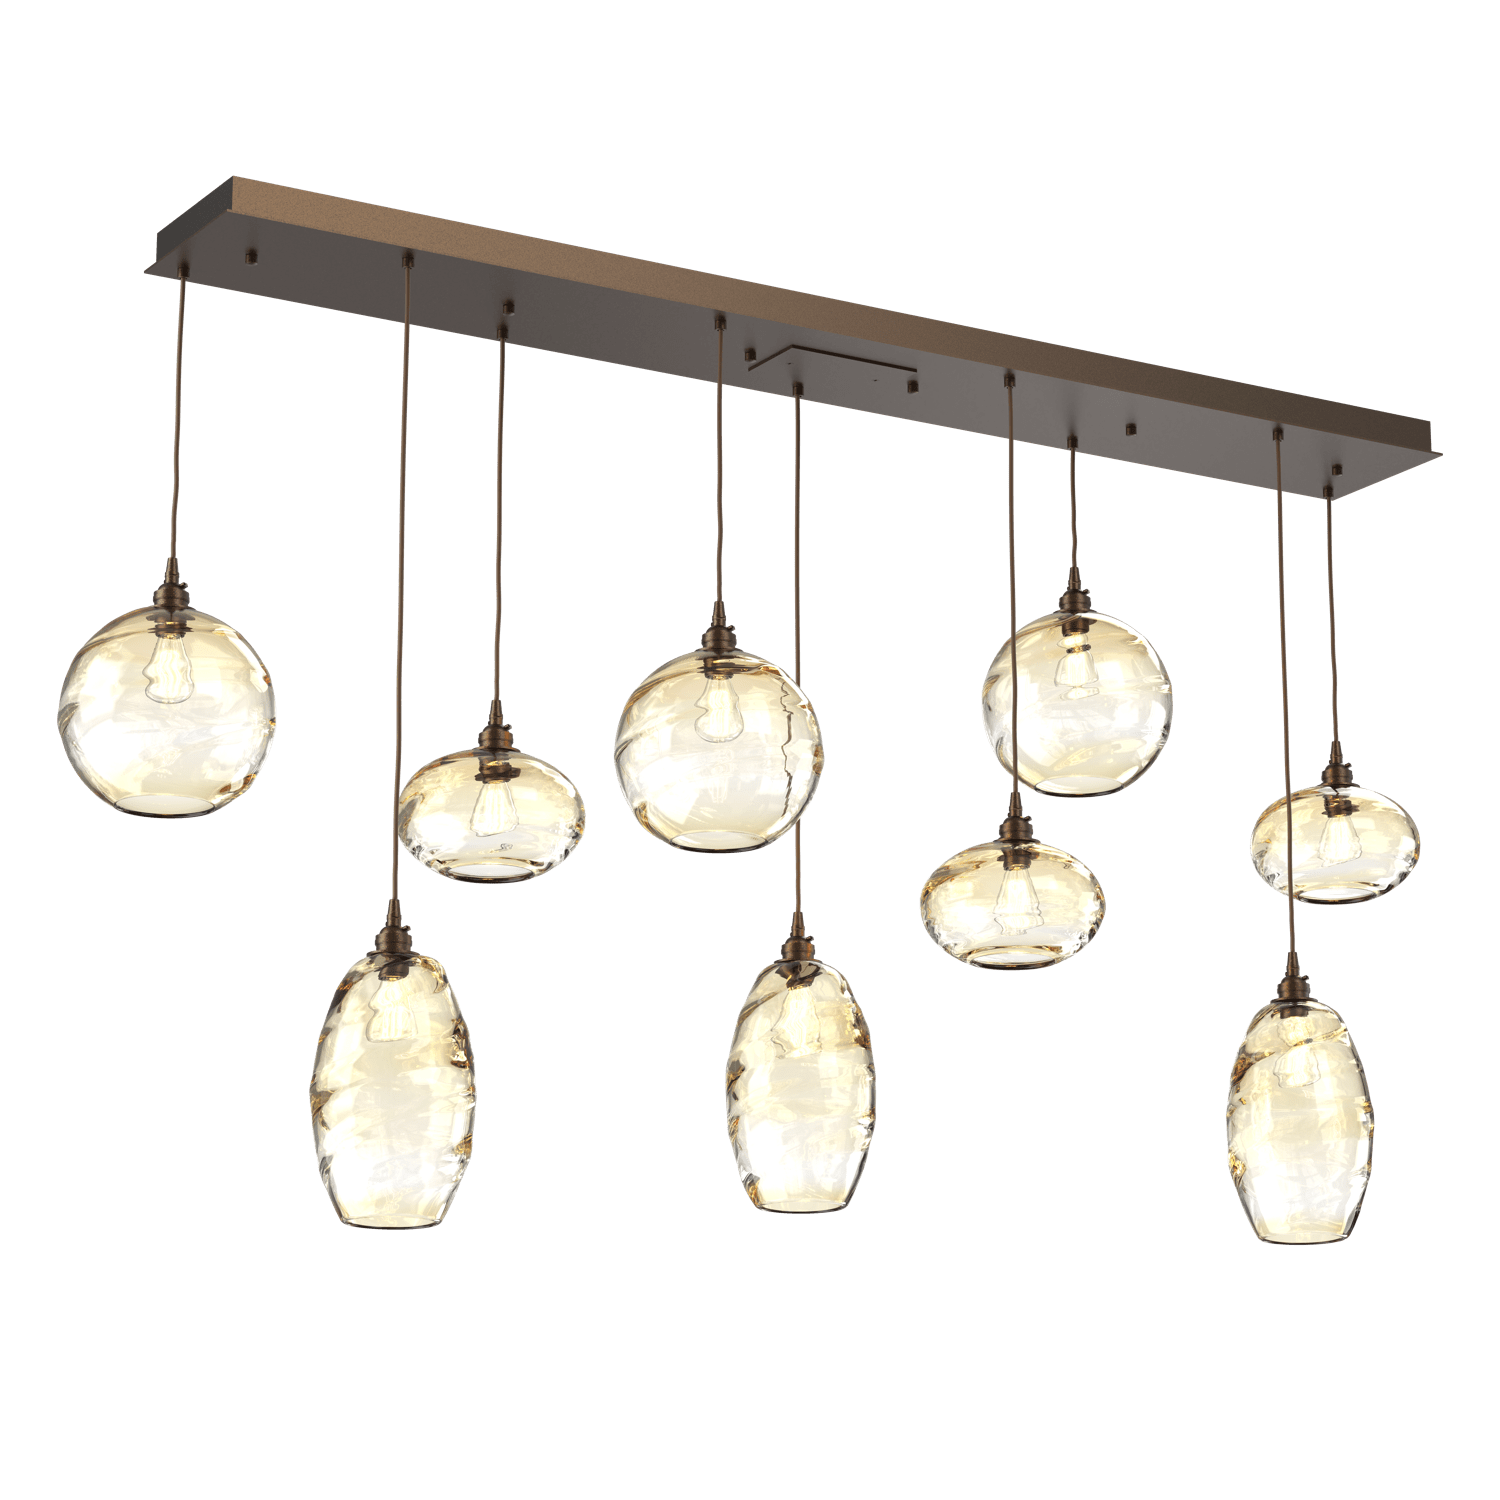 PLB0048-09-FB-OA-Hammerton-Studio-Optic-Blown-Glass-Misto-9-light-linear-pendant-chandelier-with-flat-bronze-finish-and-optic-amber-blown-glass-shades-and-incandescent-lamping